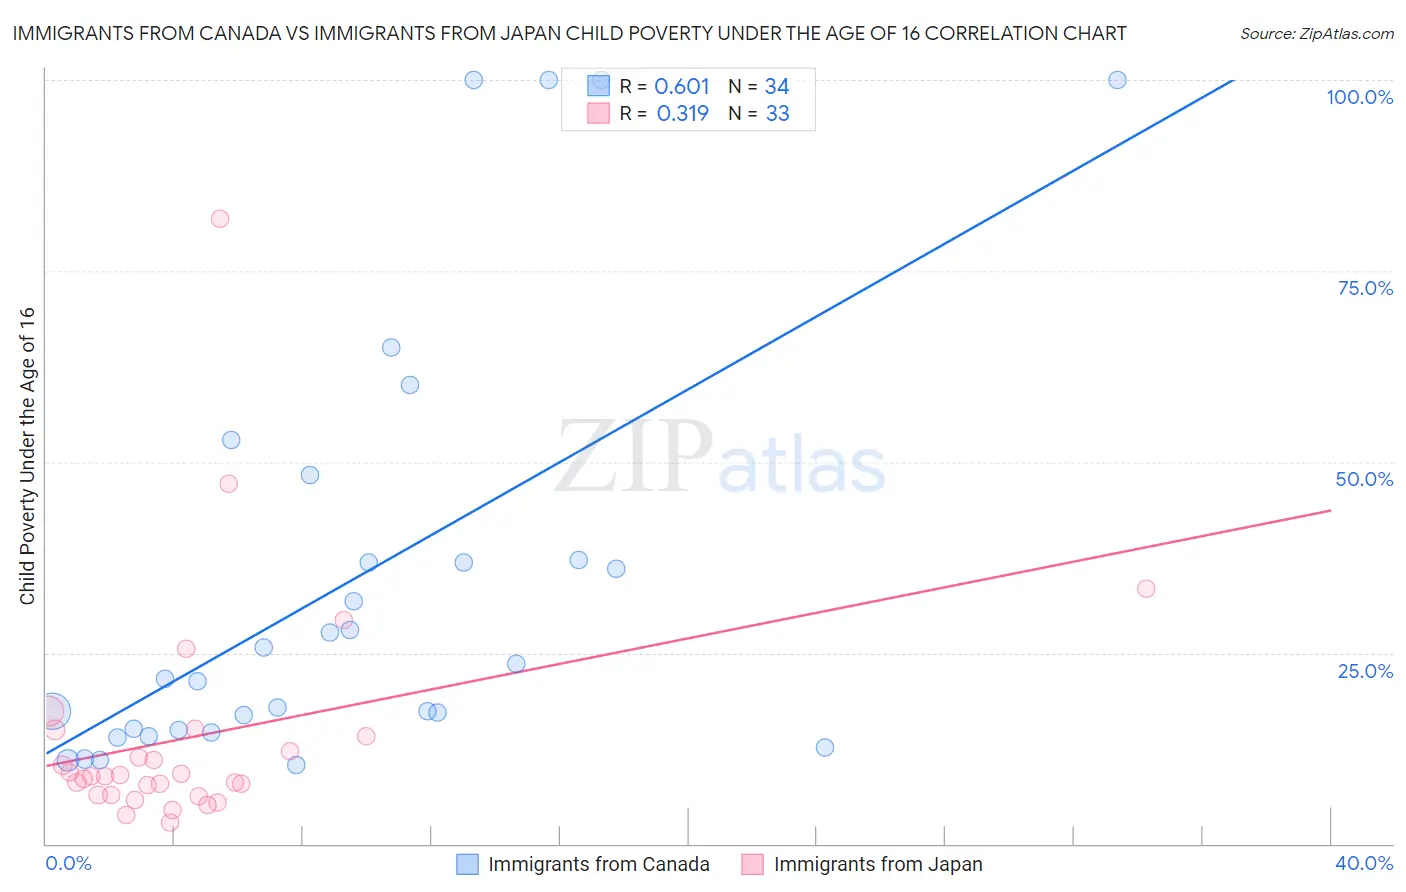 Immigrants from Canada vs Immigrants from Japan Child Poverty Under the Age of 16